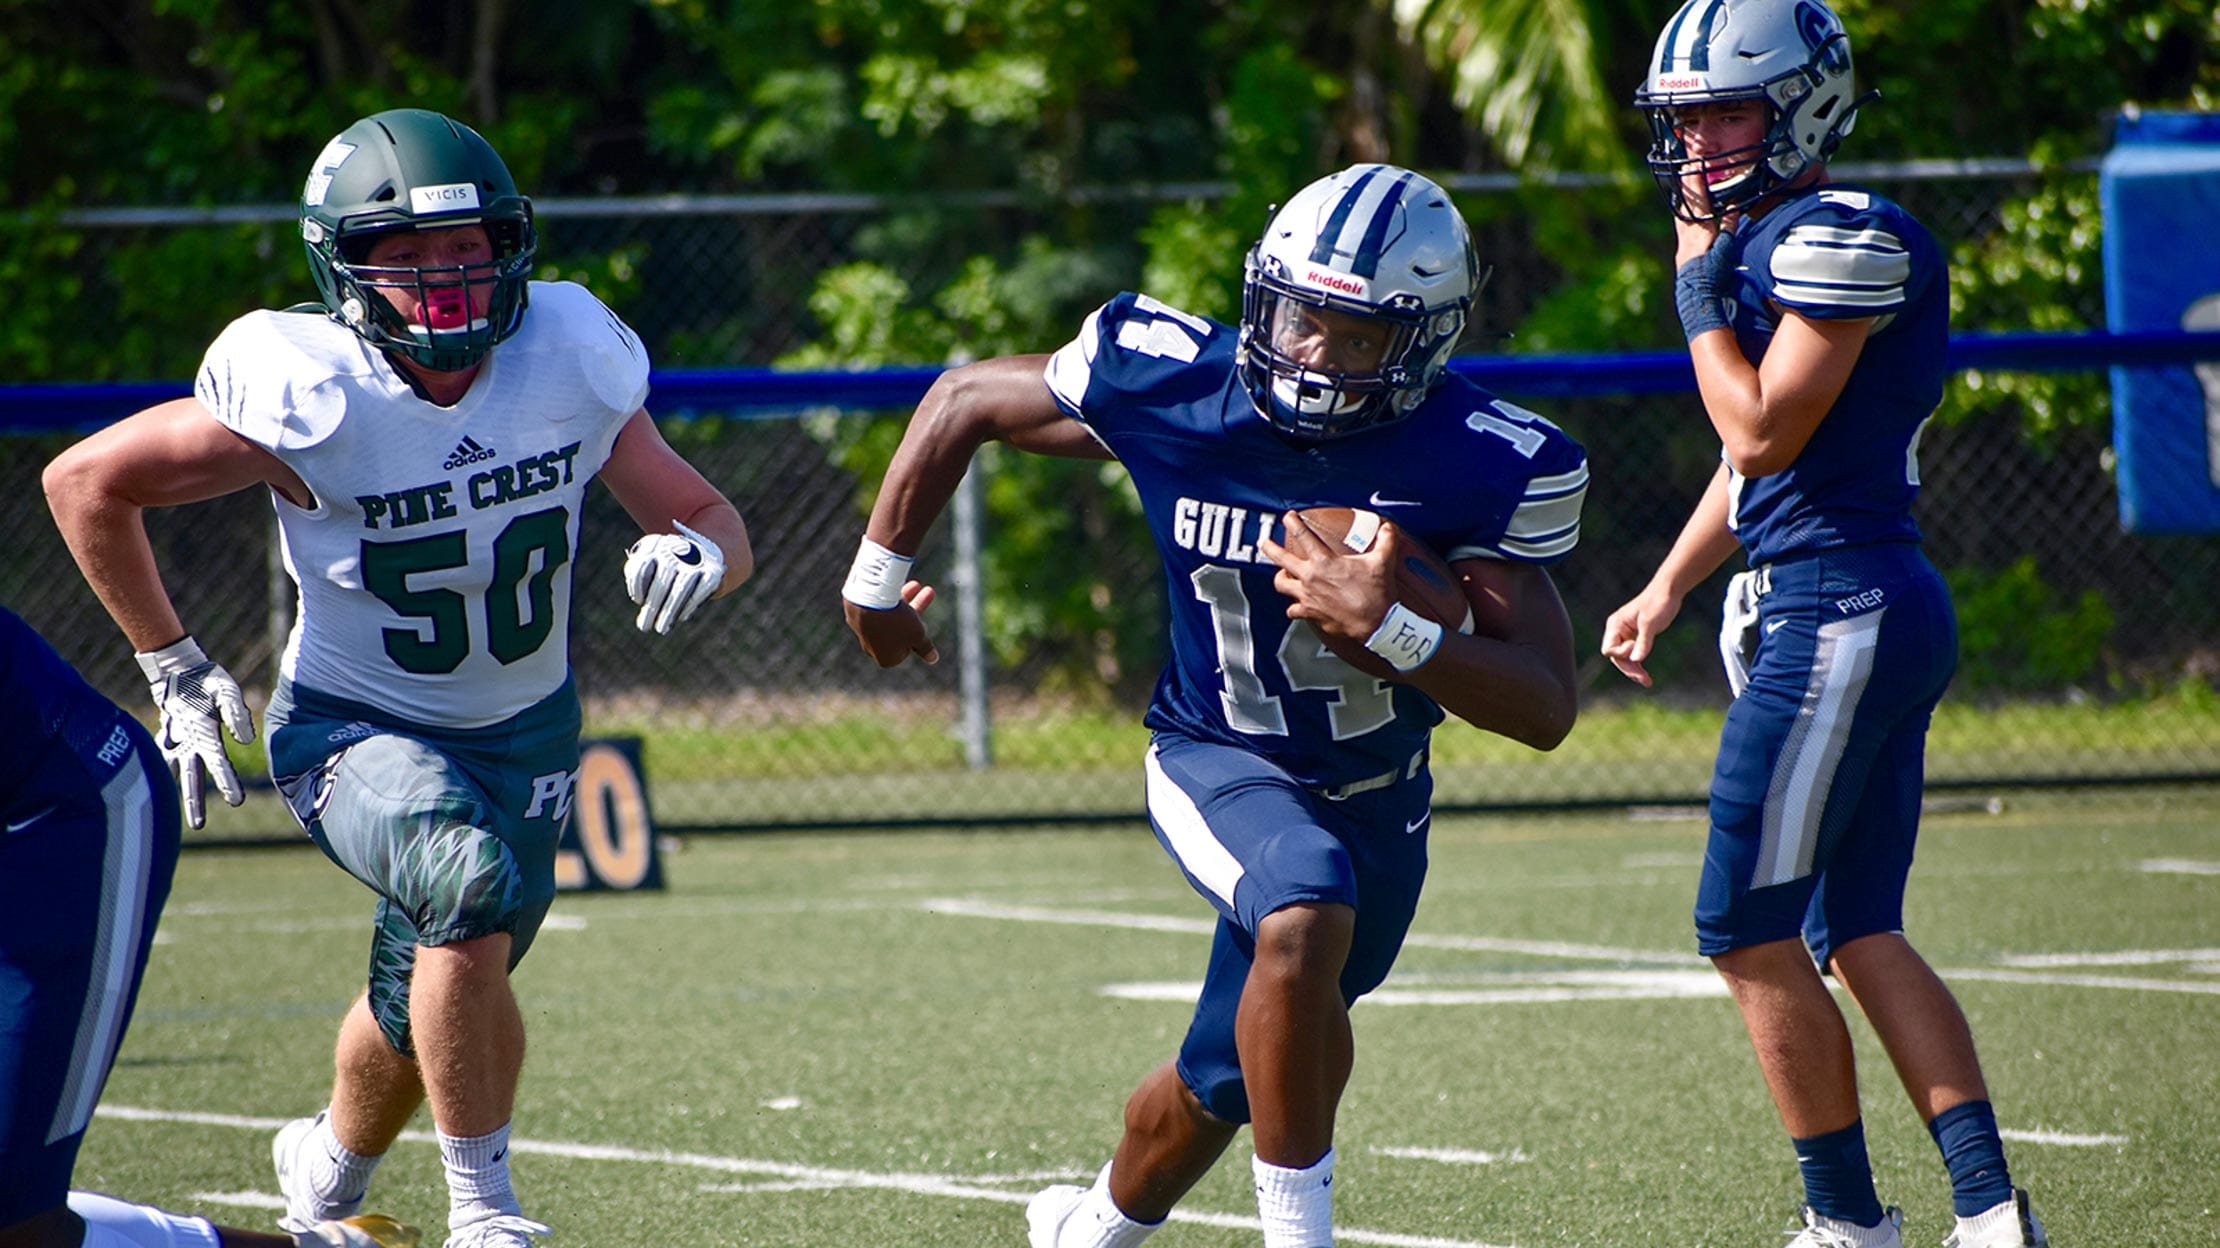 Gulliver football player running during a game.